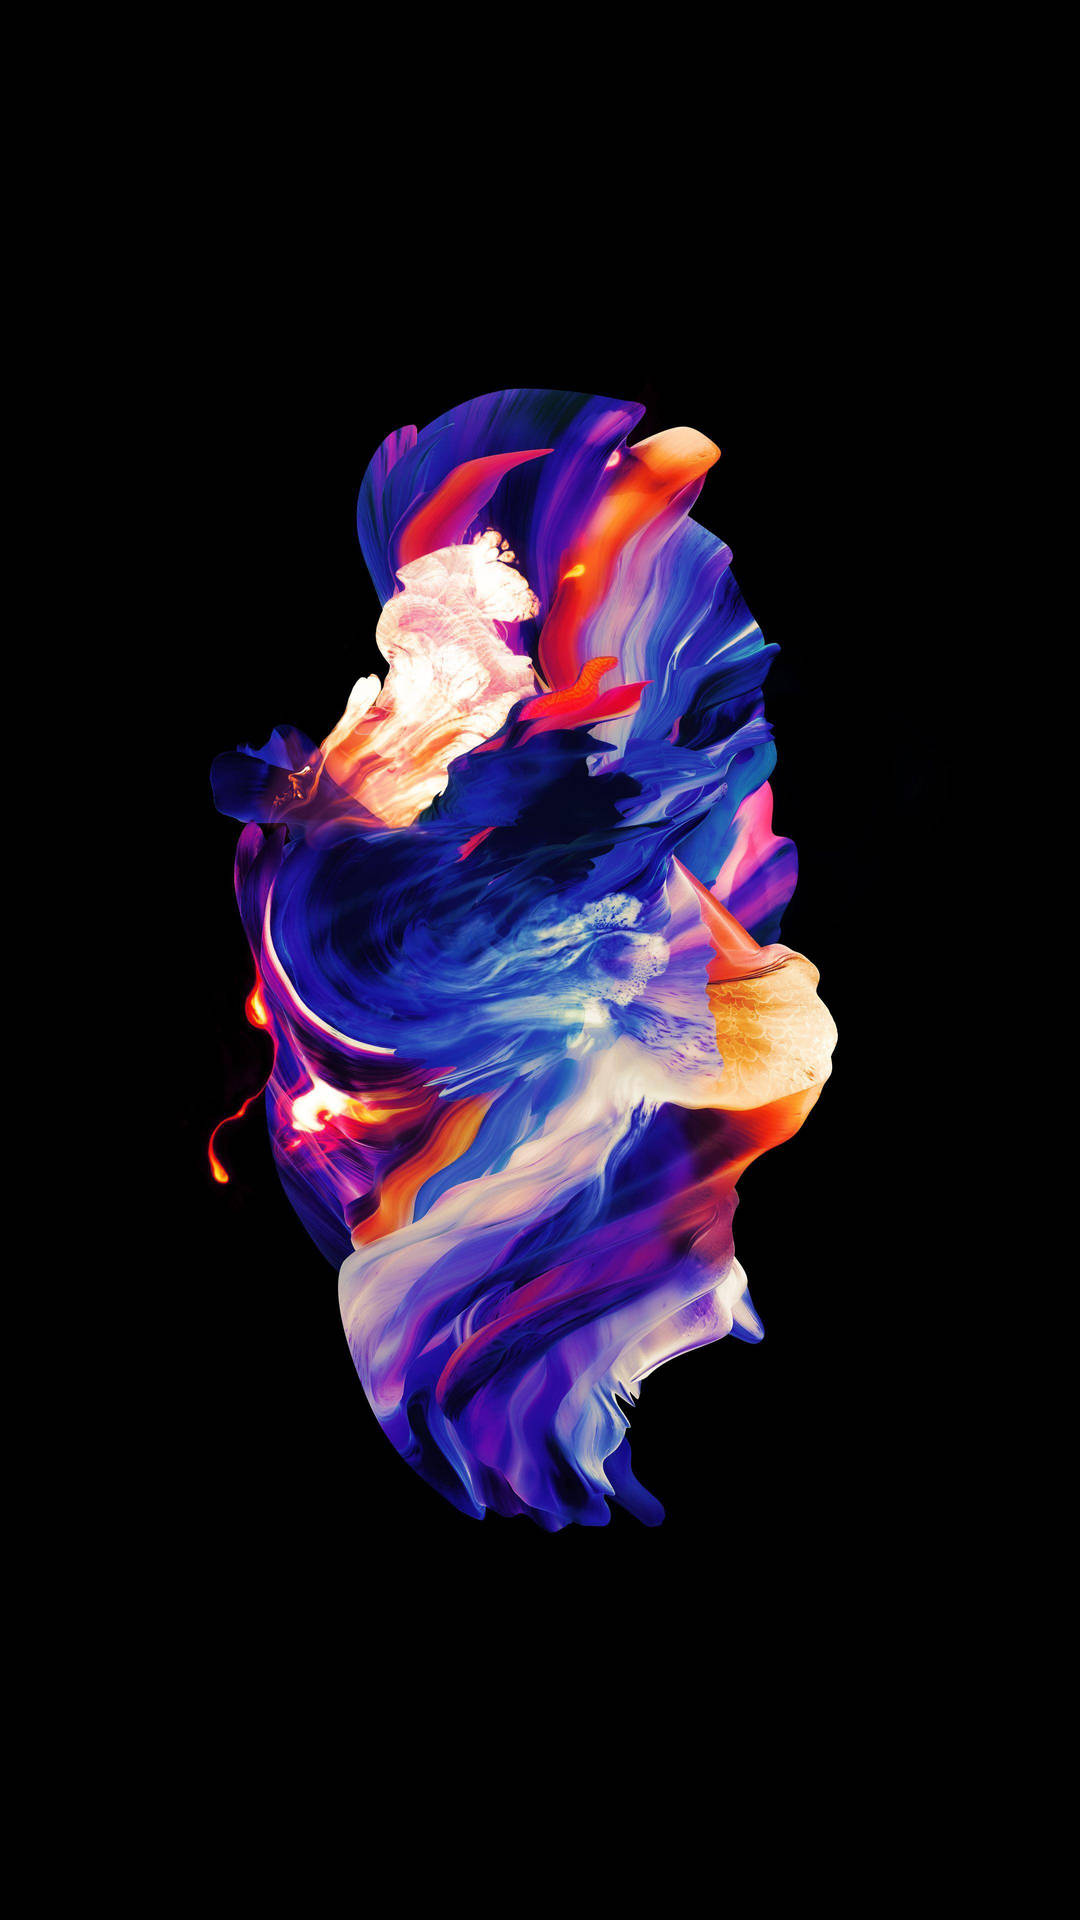 Wallpaper amoled HD Abstract Free download  Hd dark wallpapers Phone  wallpaper images Xiaomi wallpapers